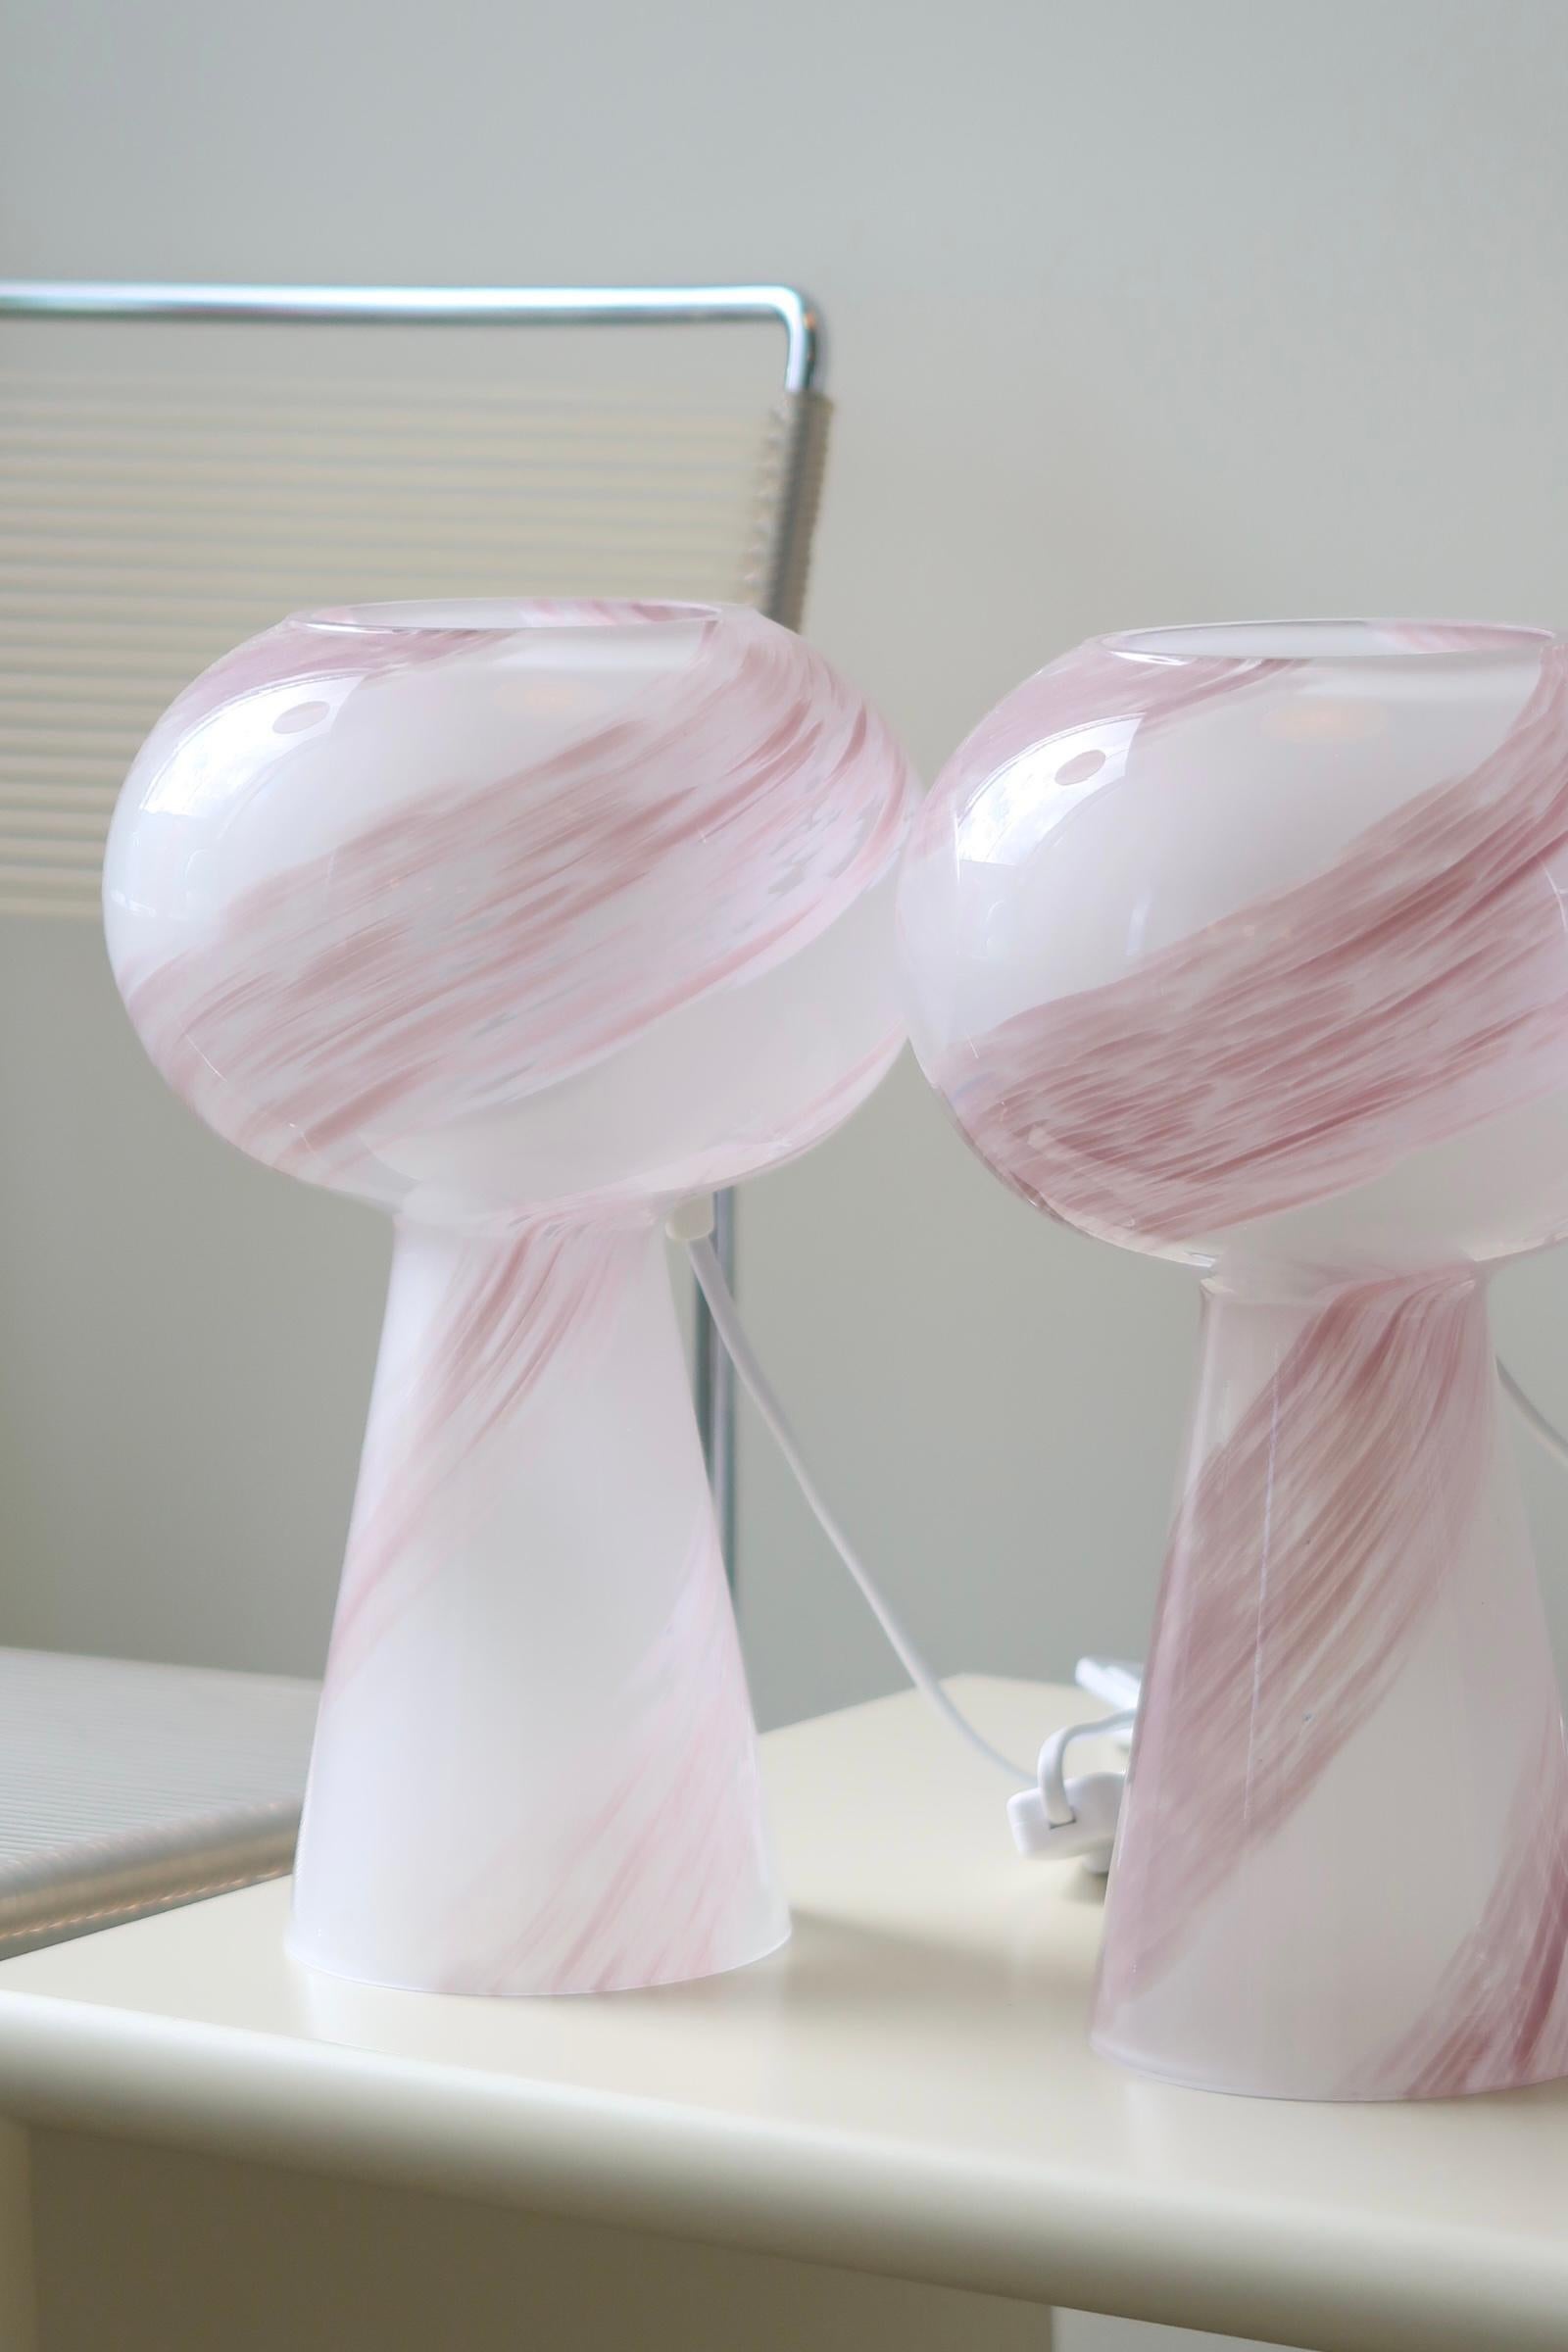 Rare vintage Murano table lamp. Mouth blown in a globe shape with a dreamy rose / pink swirl pattern. Handmade in Italy and comes with new white cord. 
H: 29 cm? D: 18 cm??

